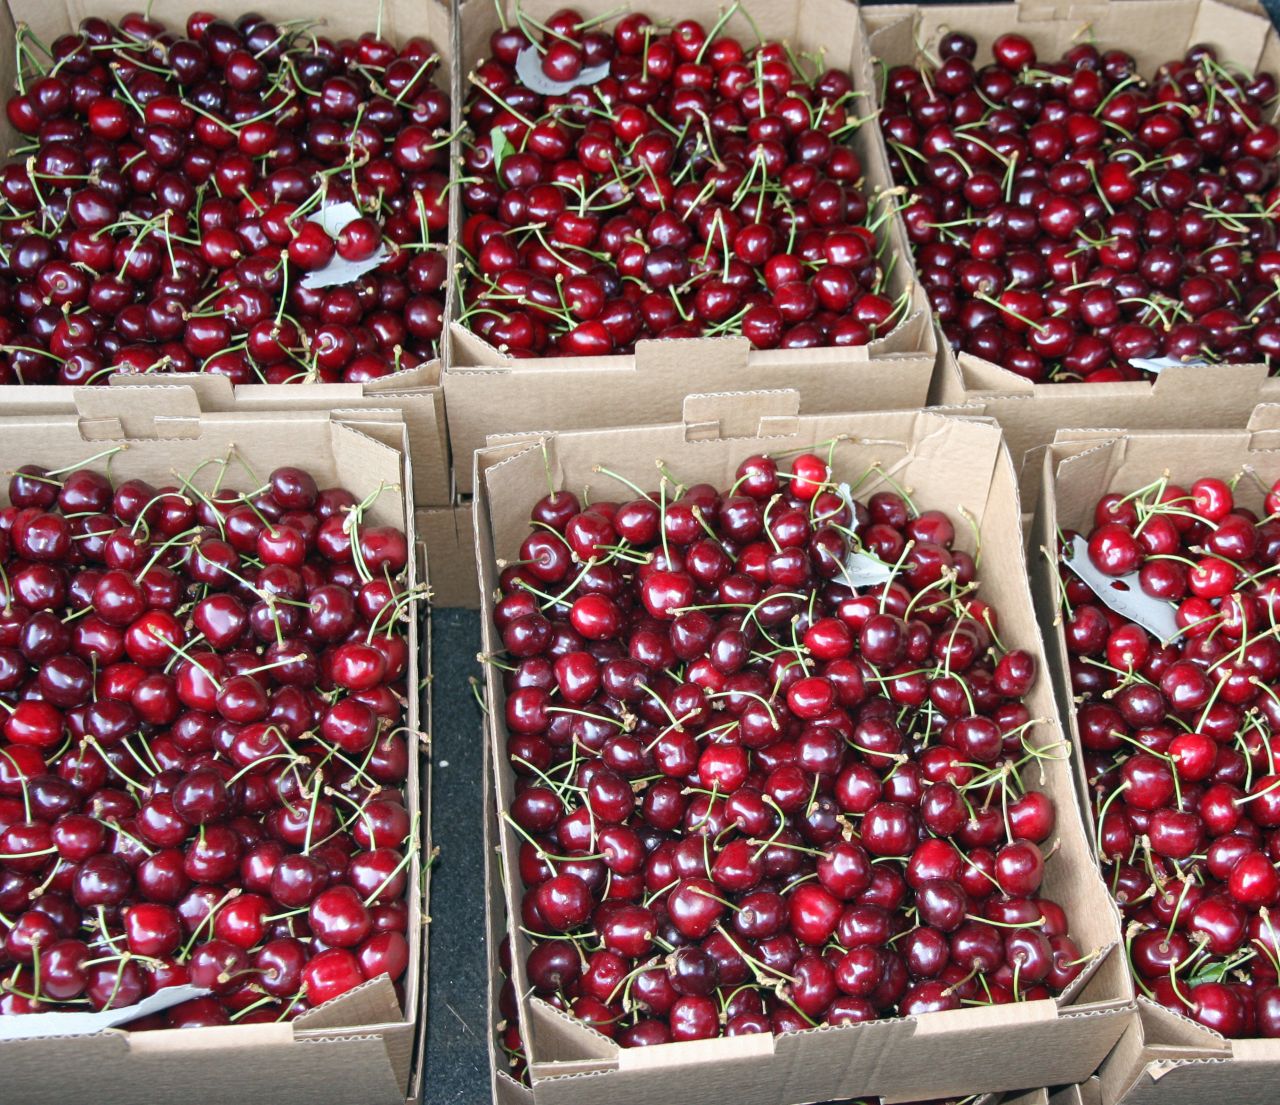 On average, samples of cherries contained five pesticides, while nearly a third contained a pesticide that European health authorities believe causes cancer. The group placed cherries in the seventh position among the dirty dozen.